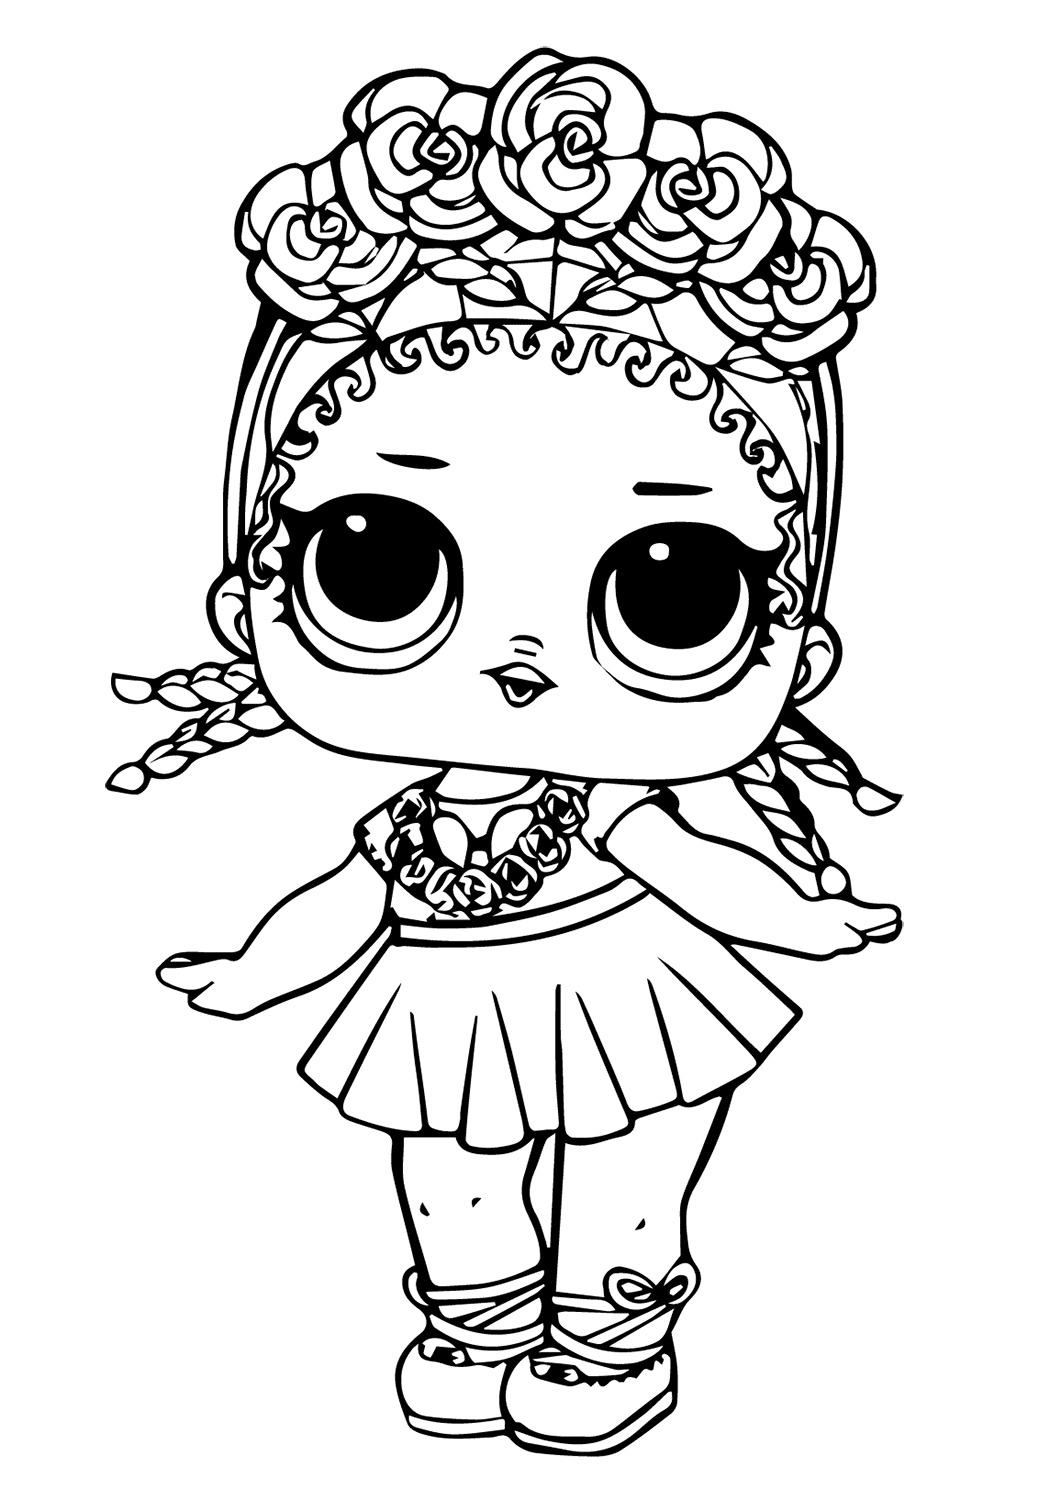 Lol Suprise Doll Coconut Coloring Pages   Lol Surprise Doll ...